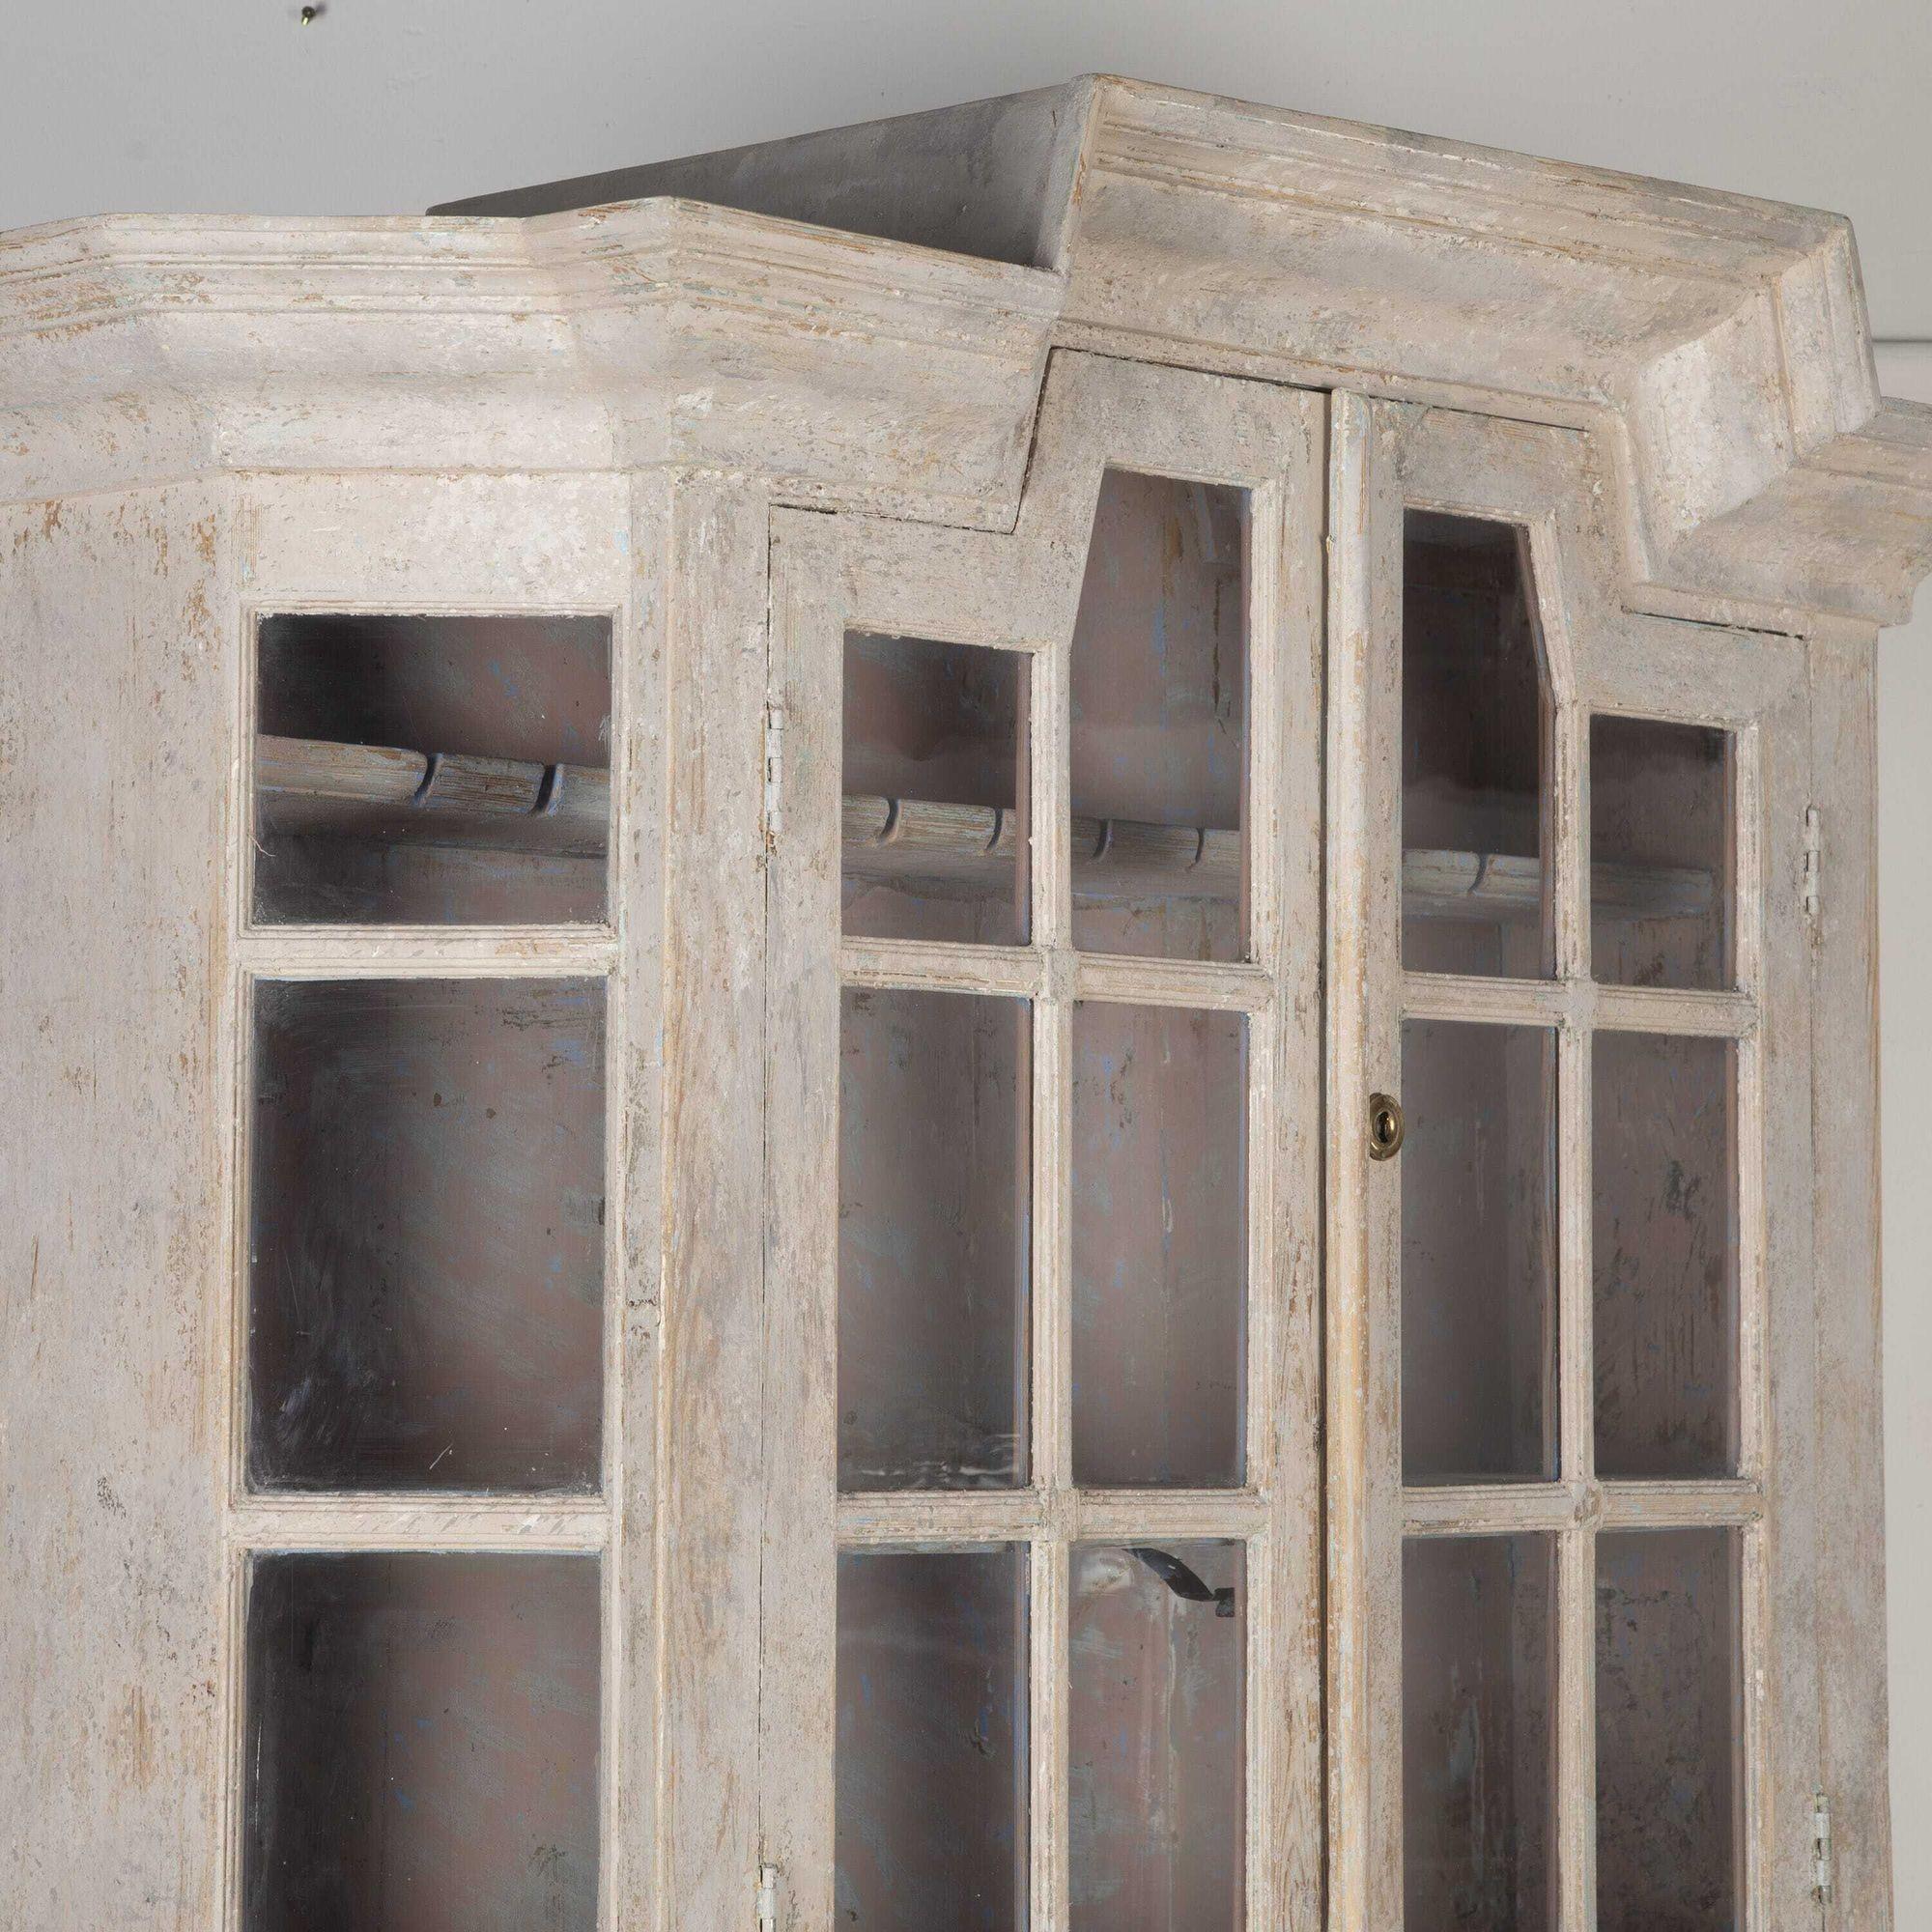 Late 18th century painted Gustavian cabinet.
Featuring a pair of glazed doors over two panelled doors with period escutcheons (not original to the piece) and later locks and hinges.
The interior is beautifully dry scraped to old pink paint.
A